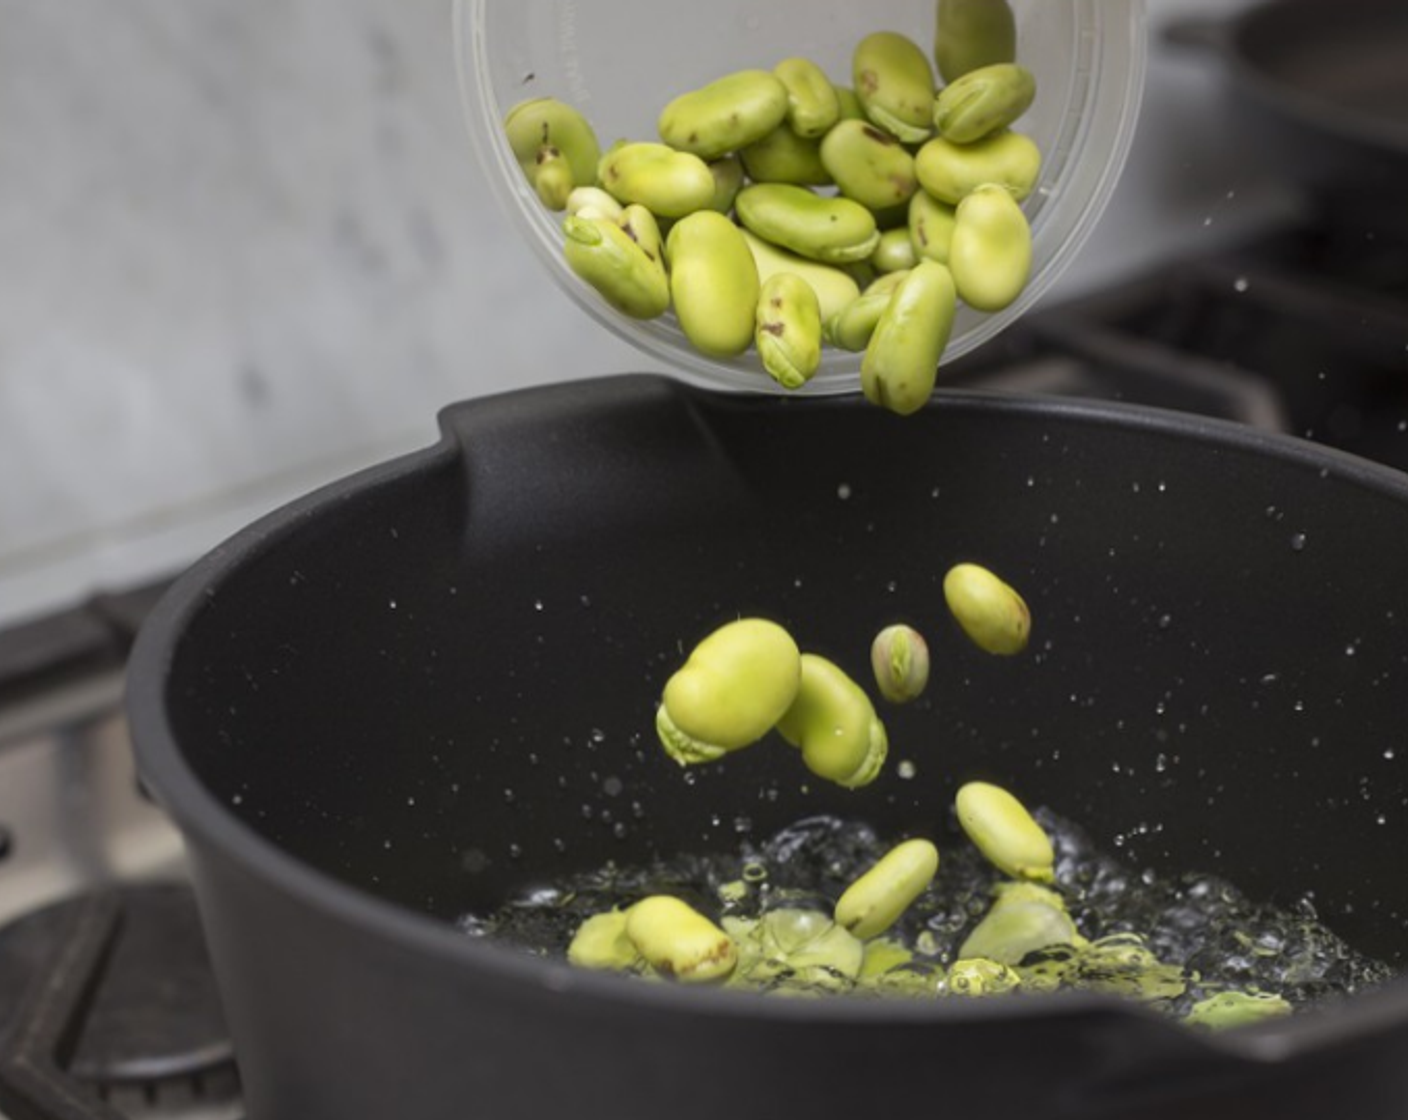 step 5 Add fava beans to the boiling water and cook until they are soft, 2­3 minutes - the bean should taste sweet, not starchy. Remove beans with a slotted spoon and drop immediately in the ice water to stop the cooking; stir and let rest a few minutes.